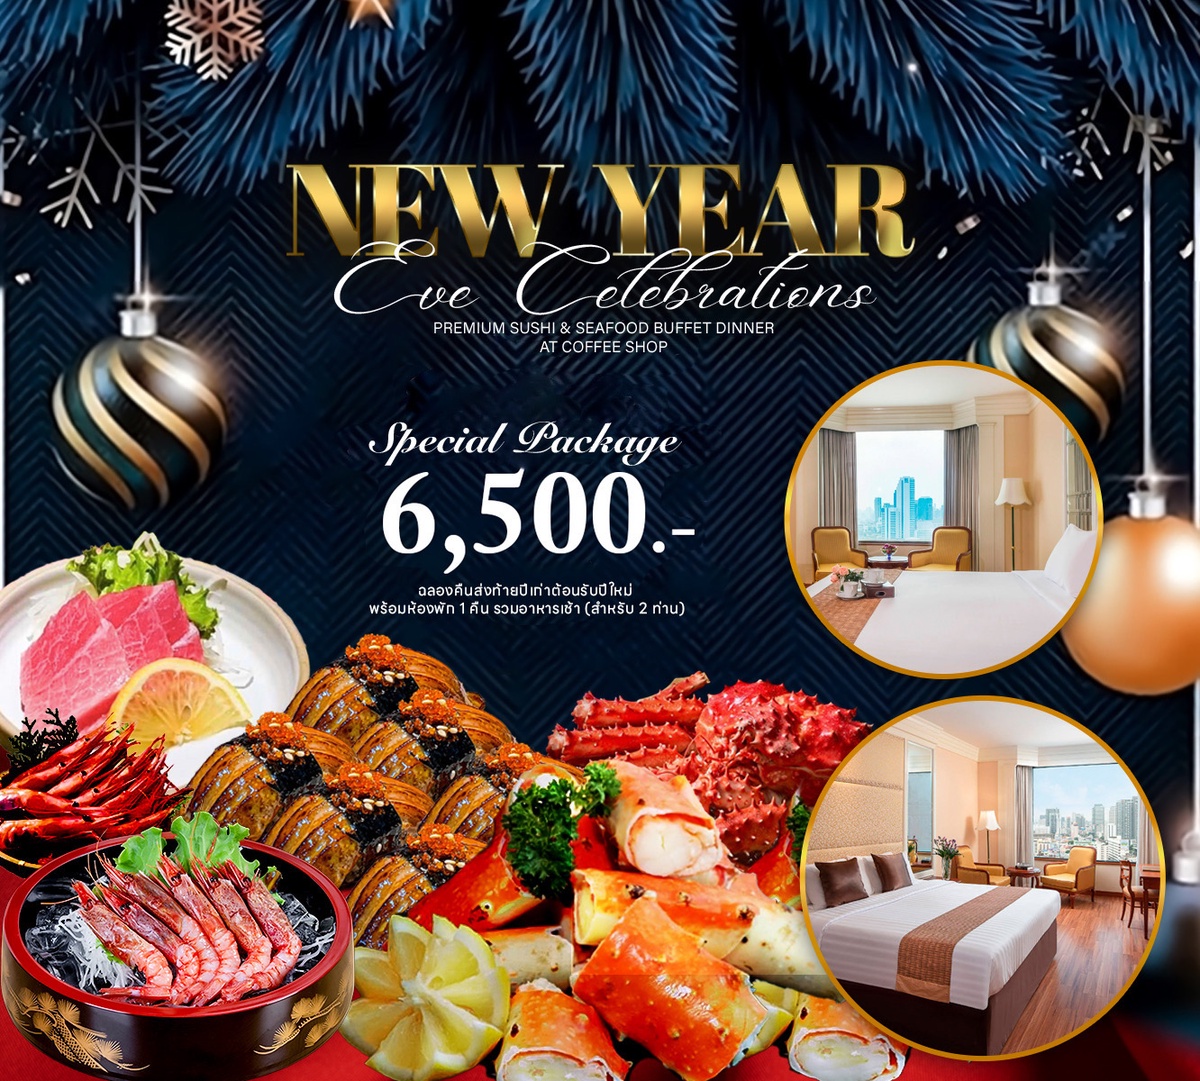 Celebrate the New Year's Eve (December 31, 2023) at the Emerald Hotel